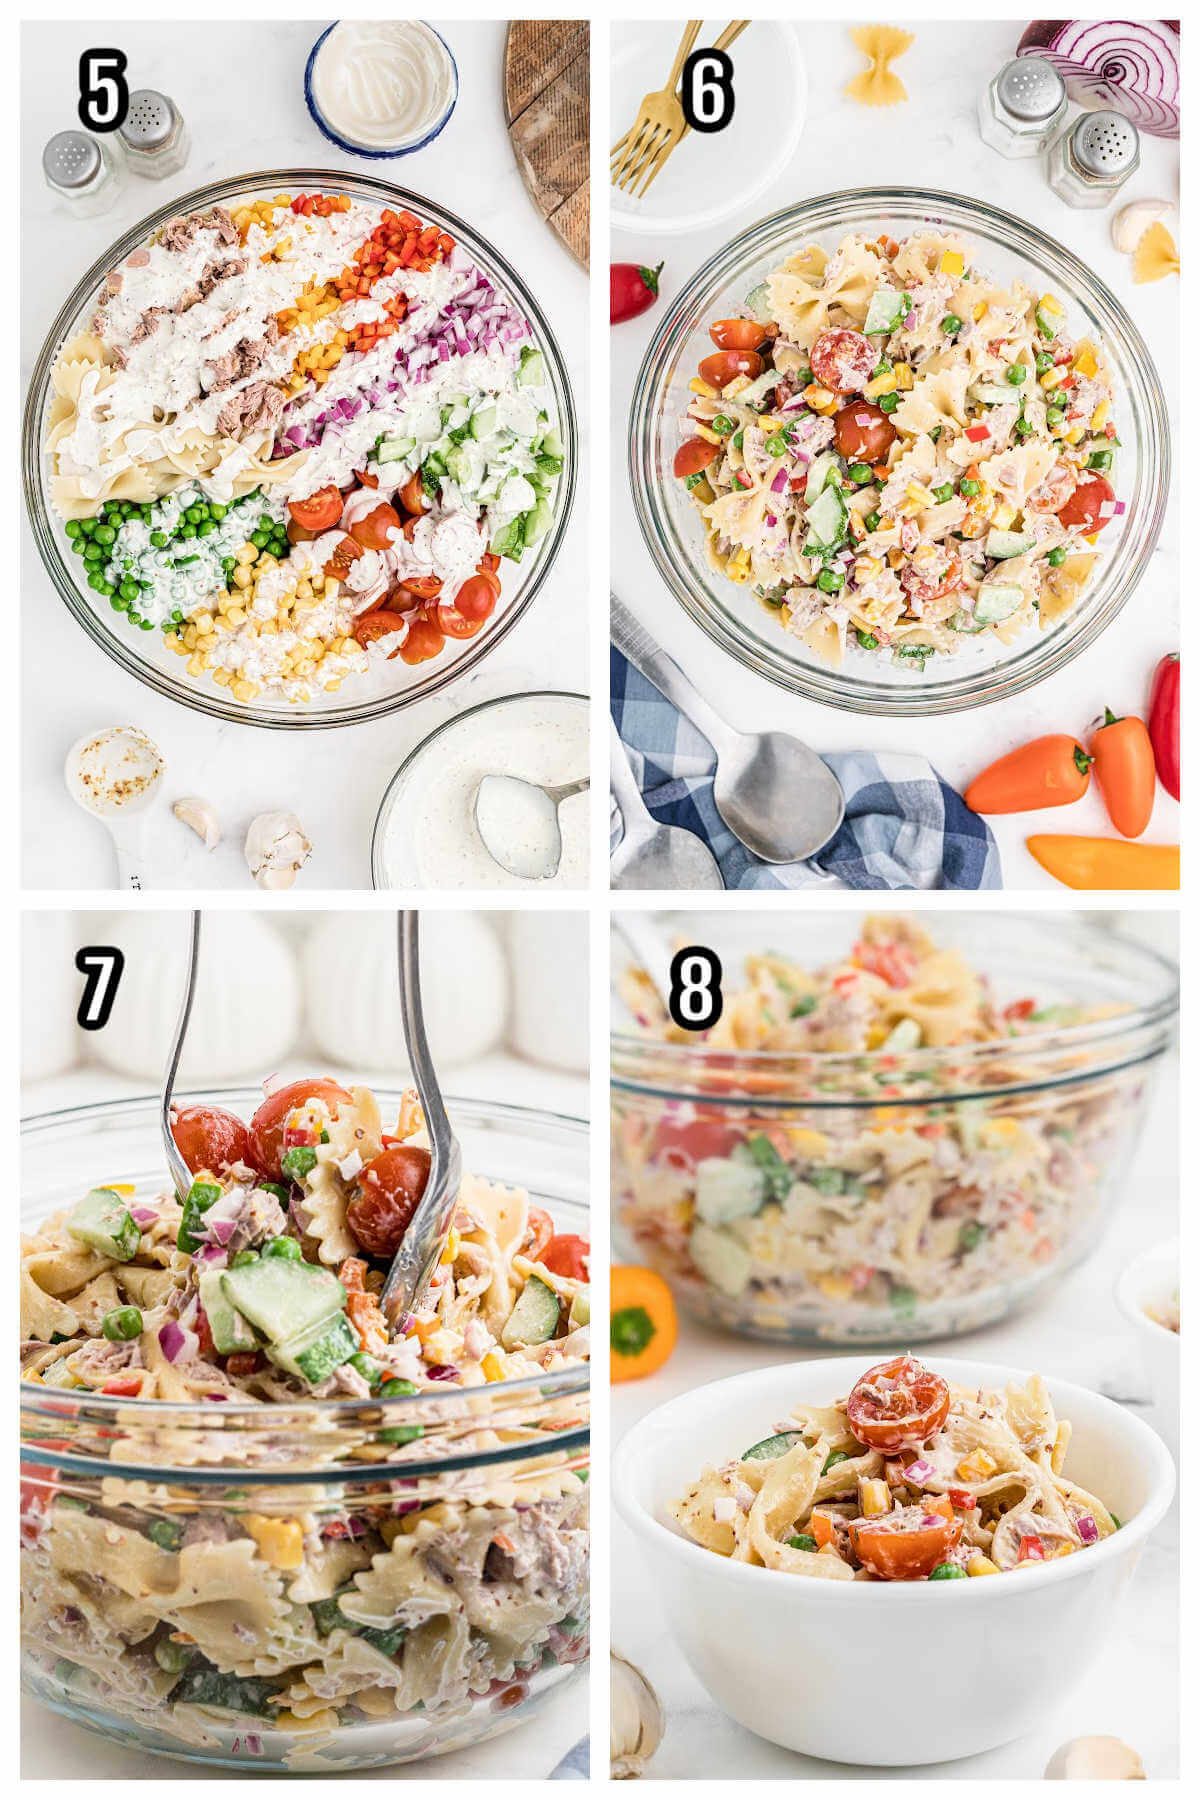 The second set of 4our steps to making and serving the Tuna Pasta Salad.